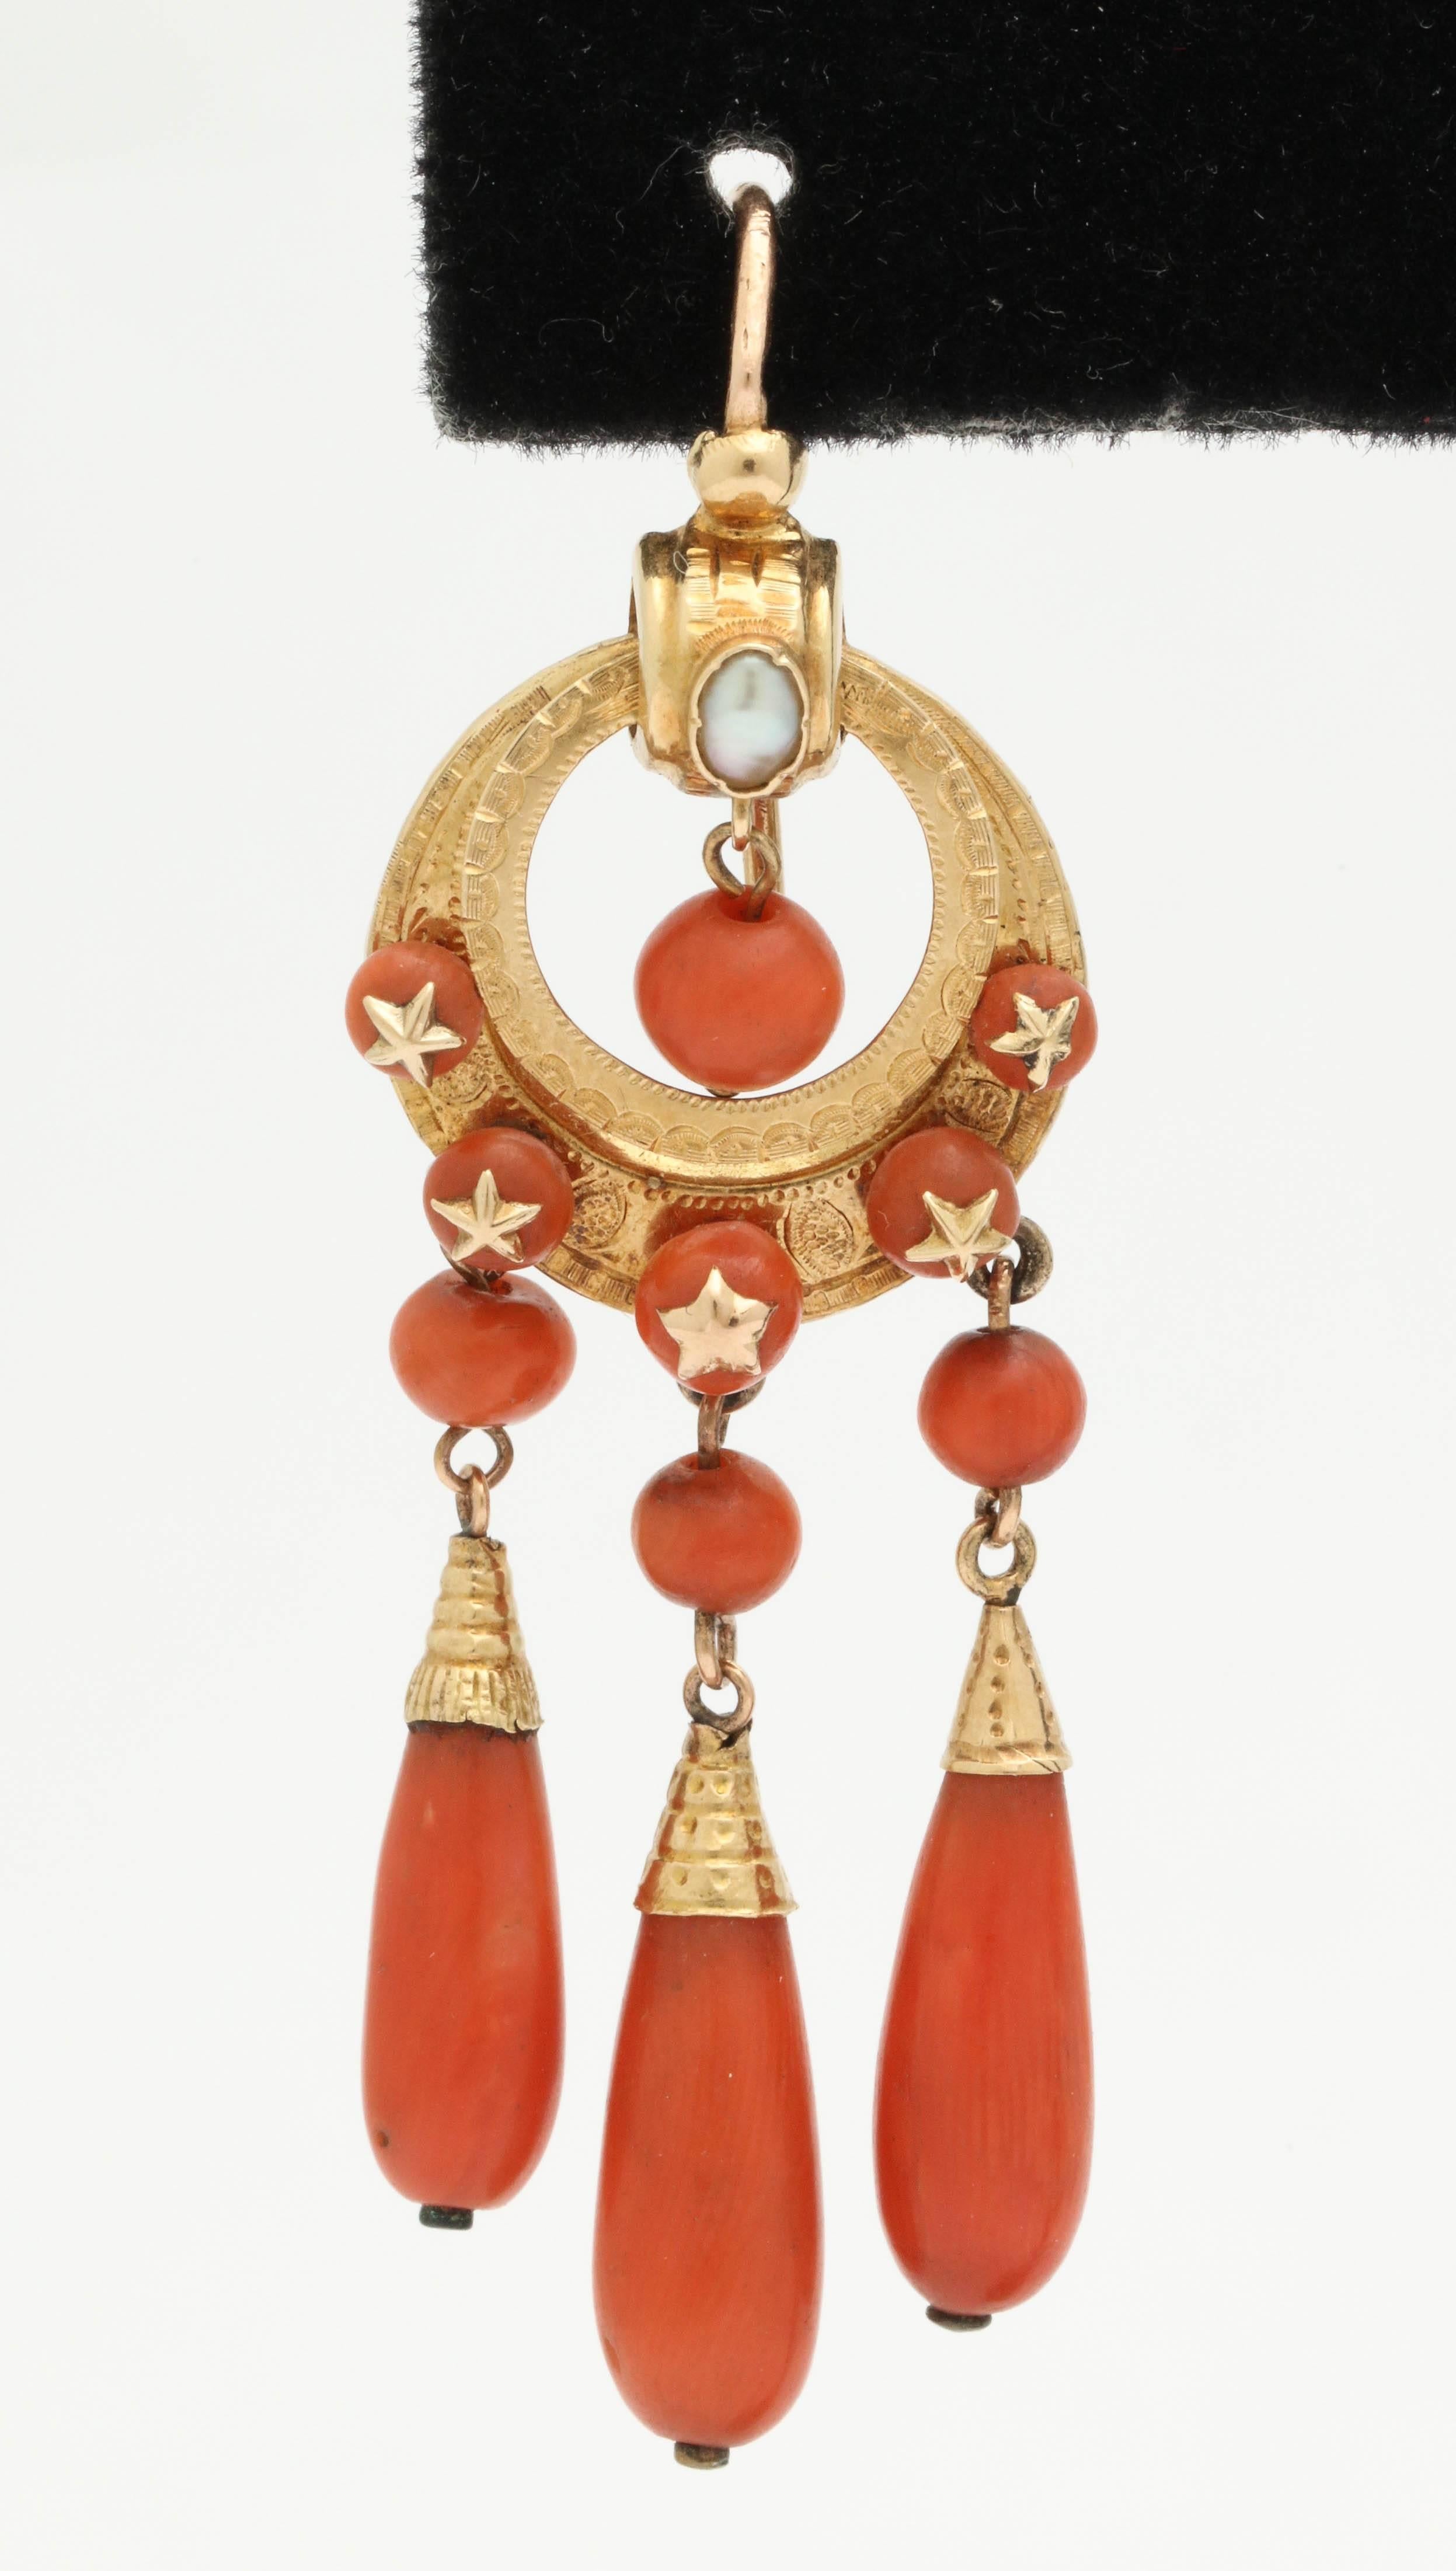 14kt Yellow Gold Fringe Drop Dangle Earrings Designed With 6 Tear-Drop Shaped Coral Stones And 18 Round Cut Coral Pieces in Which 10 Coral Pieces Are Beautifully Designed With 14kt Yellow Gold Star motifs.Made In The Victorian Era In the United